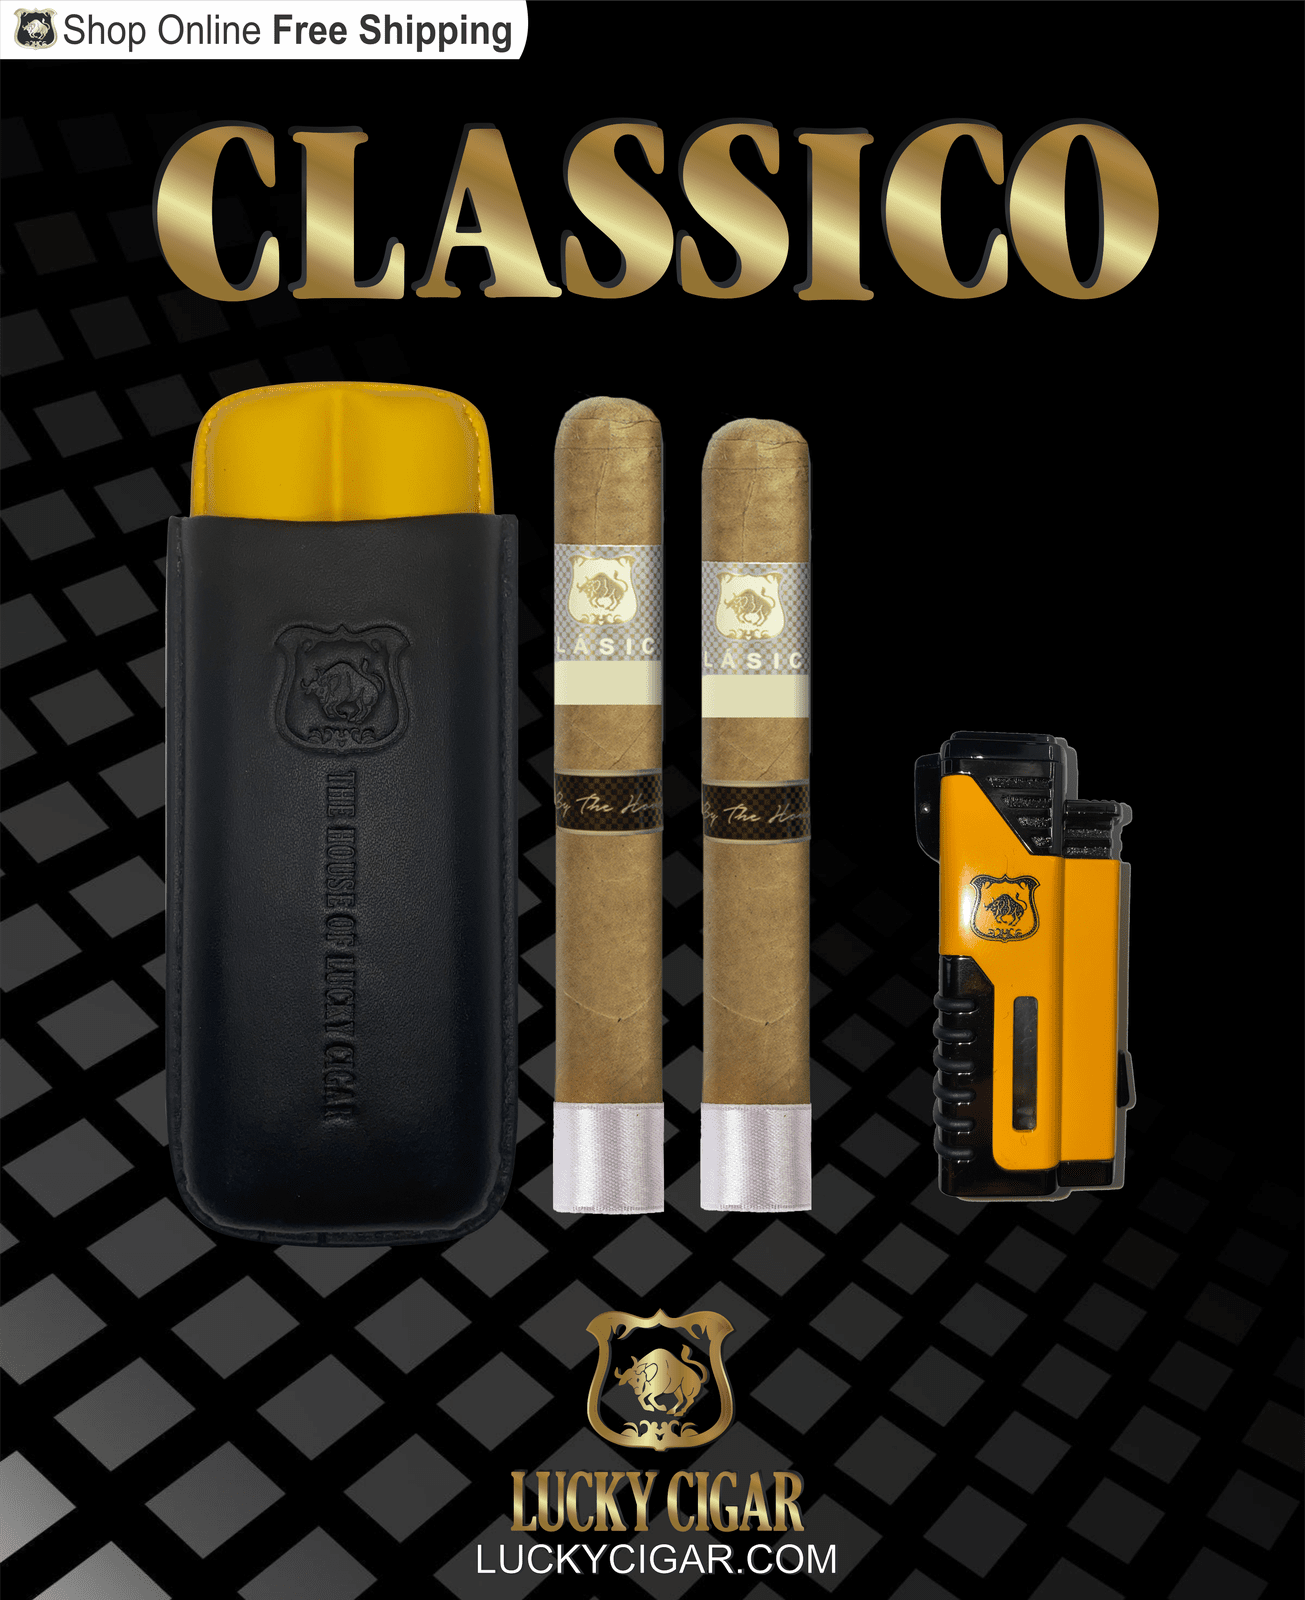 Lucky Cigar Sampler Sets: Set of 2 Classico Toro 6x50 Cigars with Travel Humidor Case, Torch